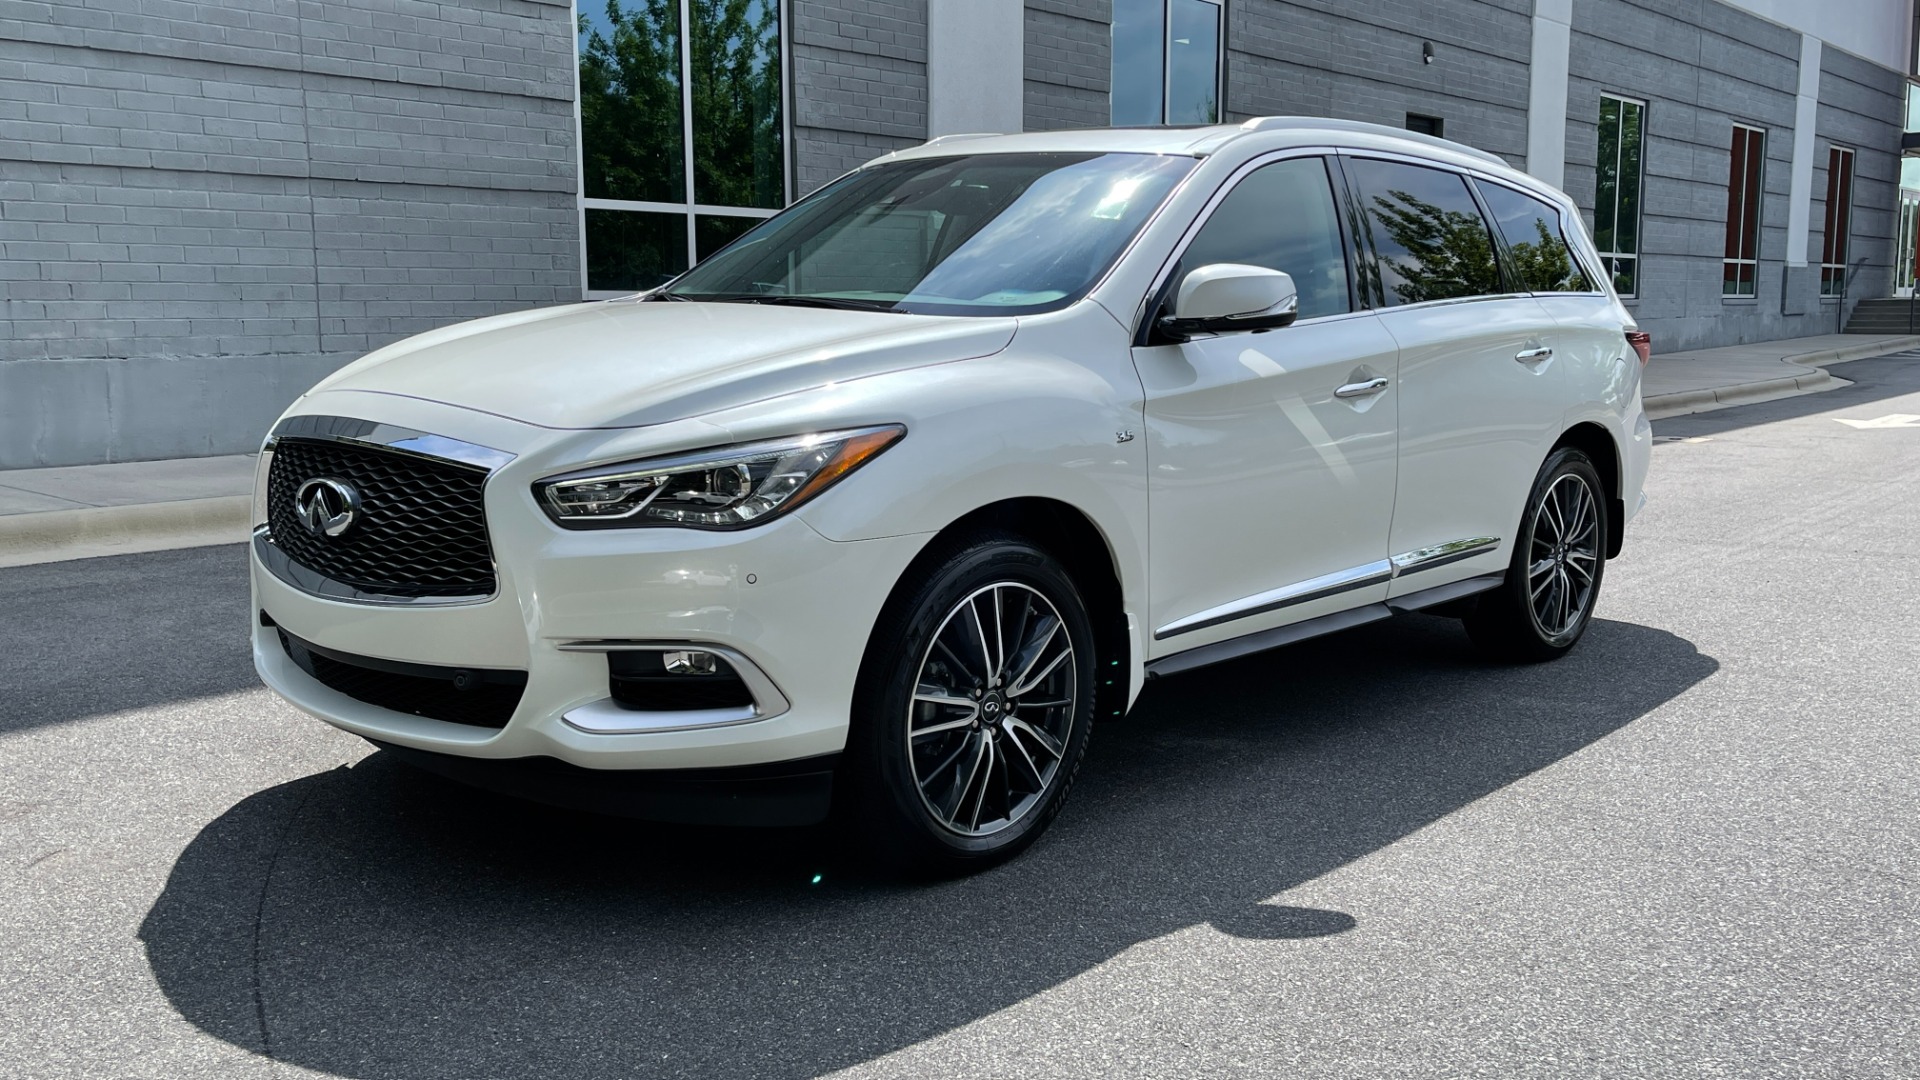 Used 2016 INFINITI QX60 AWD / DVD / 3RD ROW SEATS / DELUXE TECH for sale $27,999 at Formula Imports in Charlotte NC 28227 2